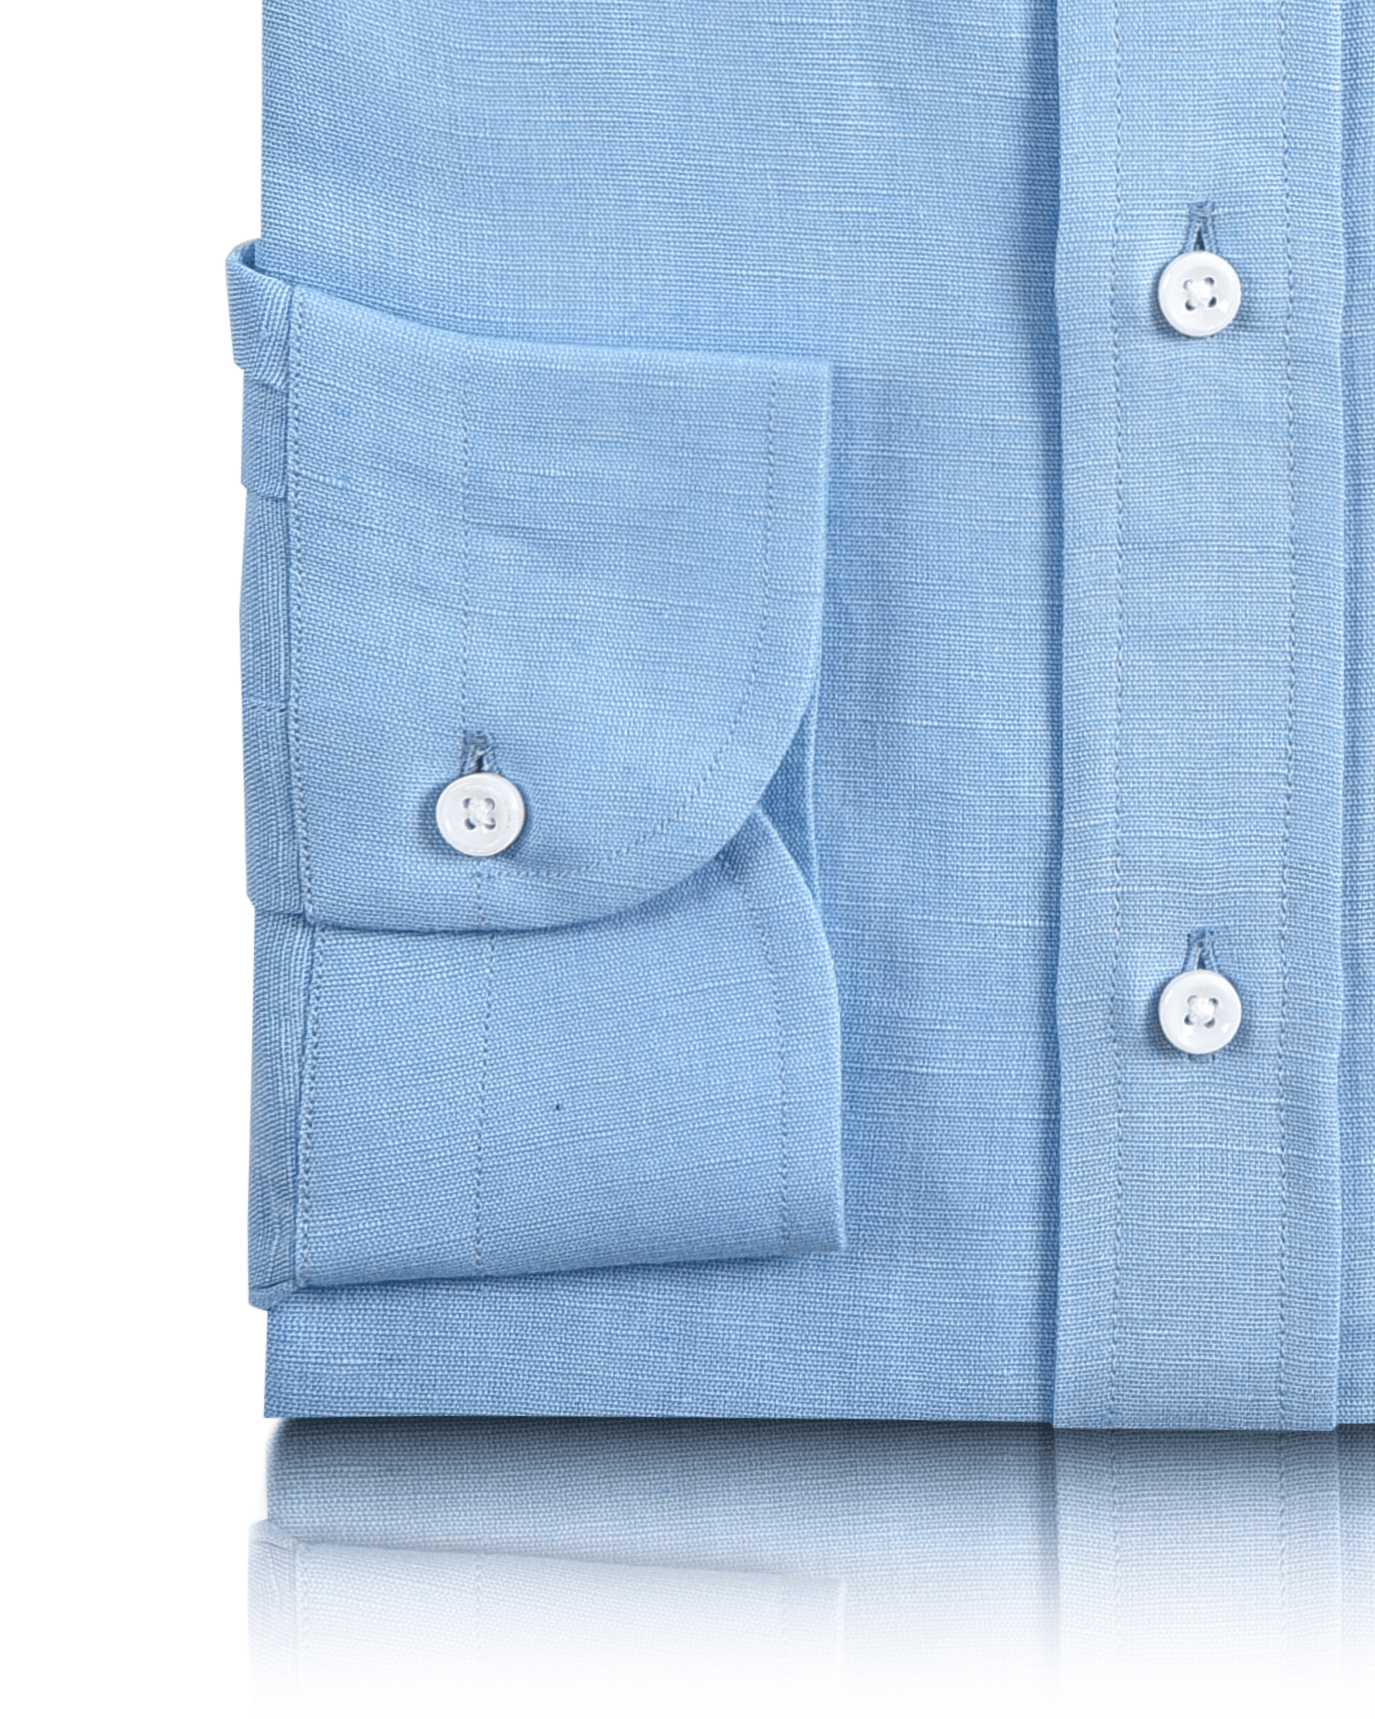 Cuff of the custom linen shirt for men in mid blue by Luxire Clothing